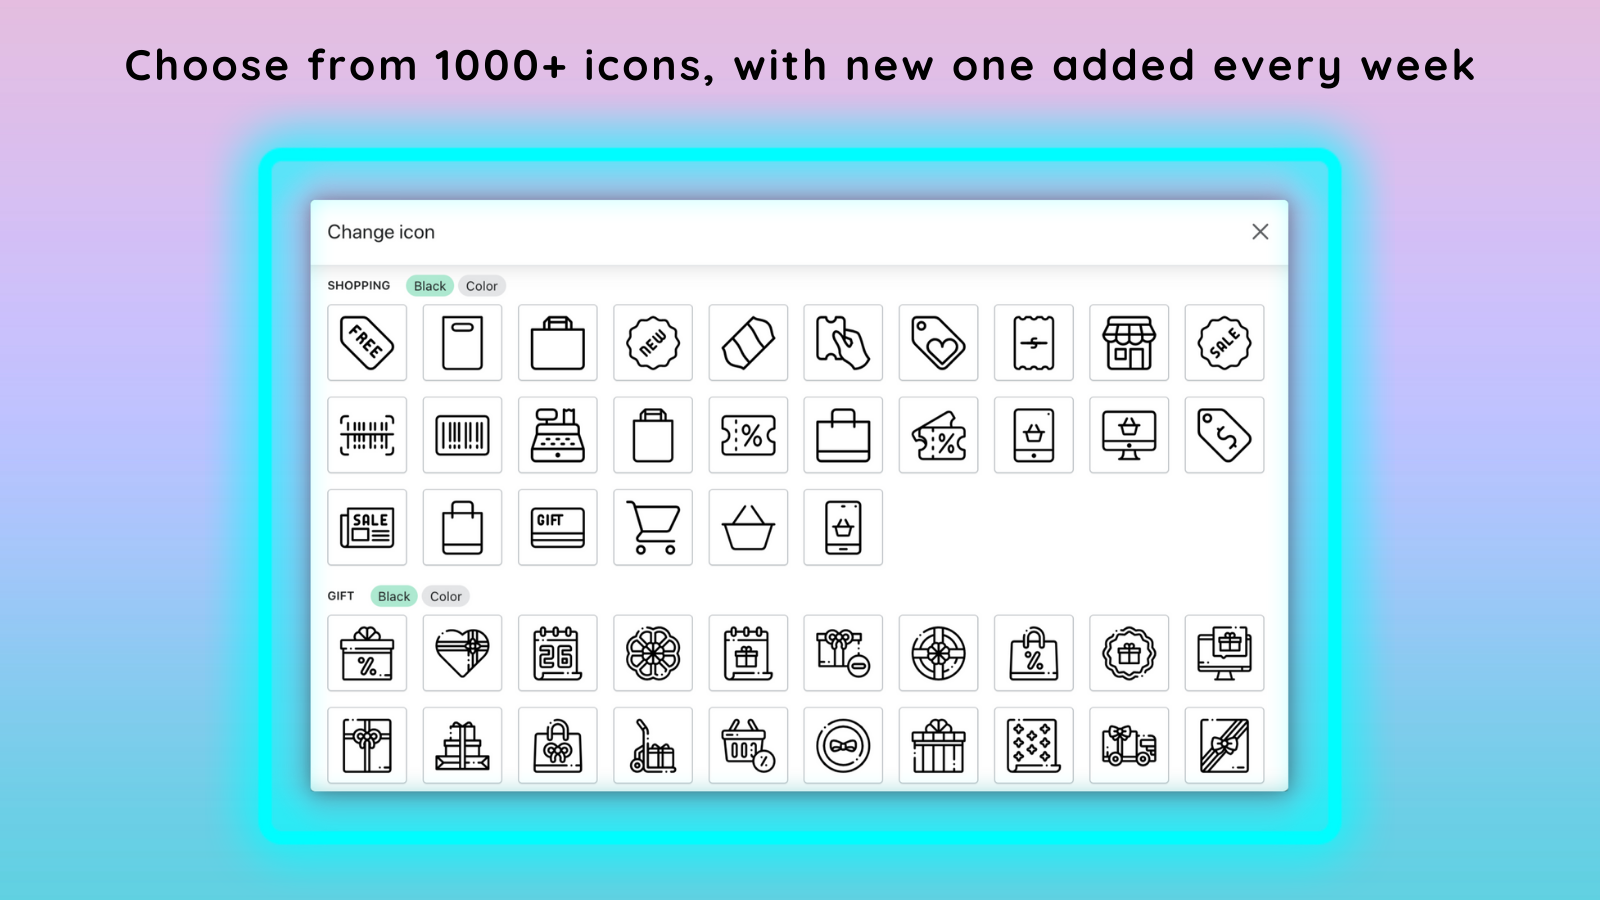 1000+ icons library